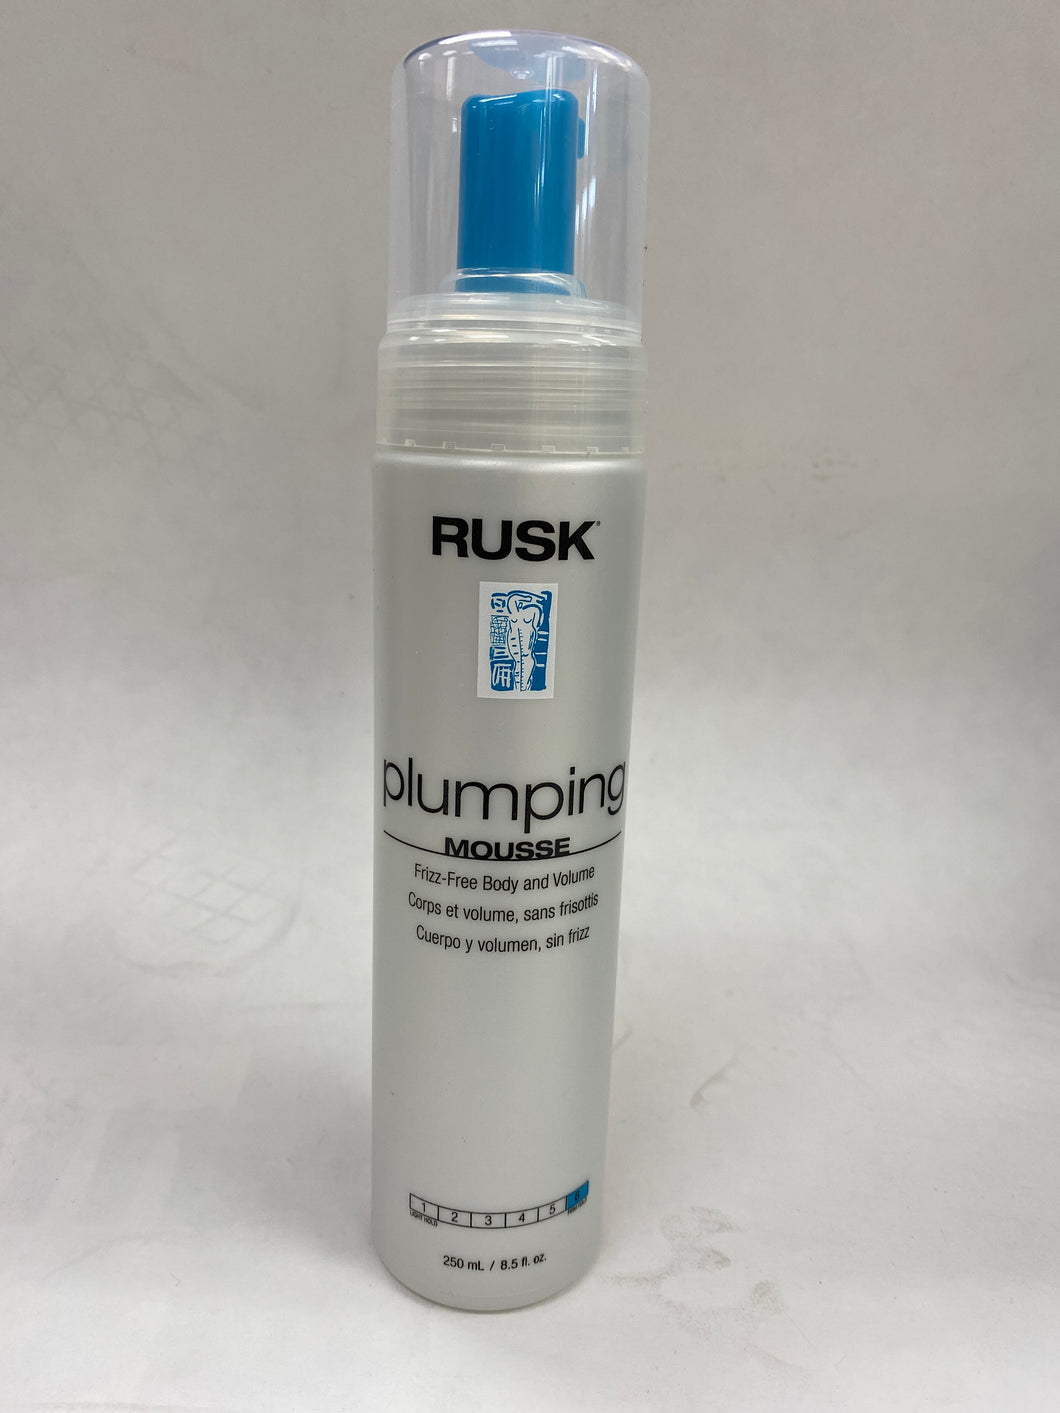 Rusk Plumping MOUSSE